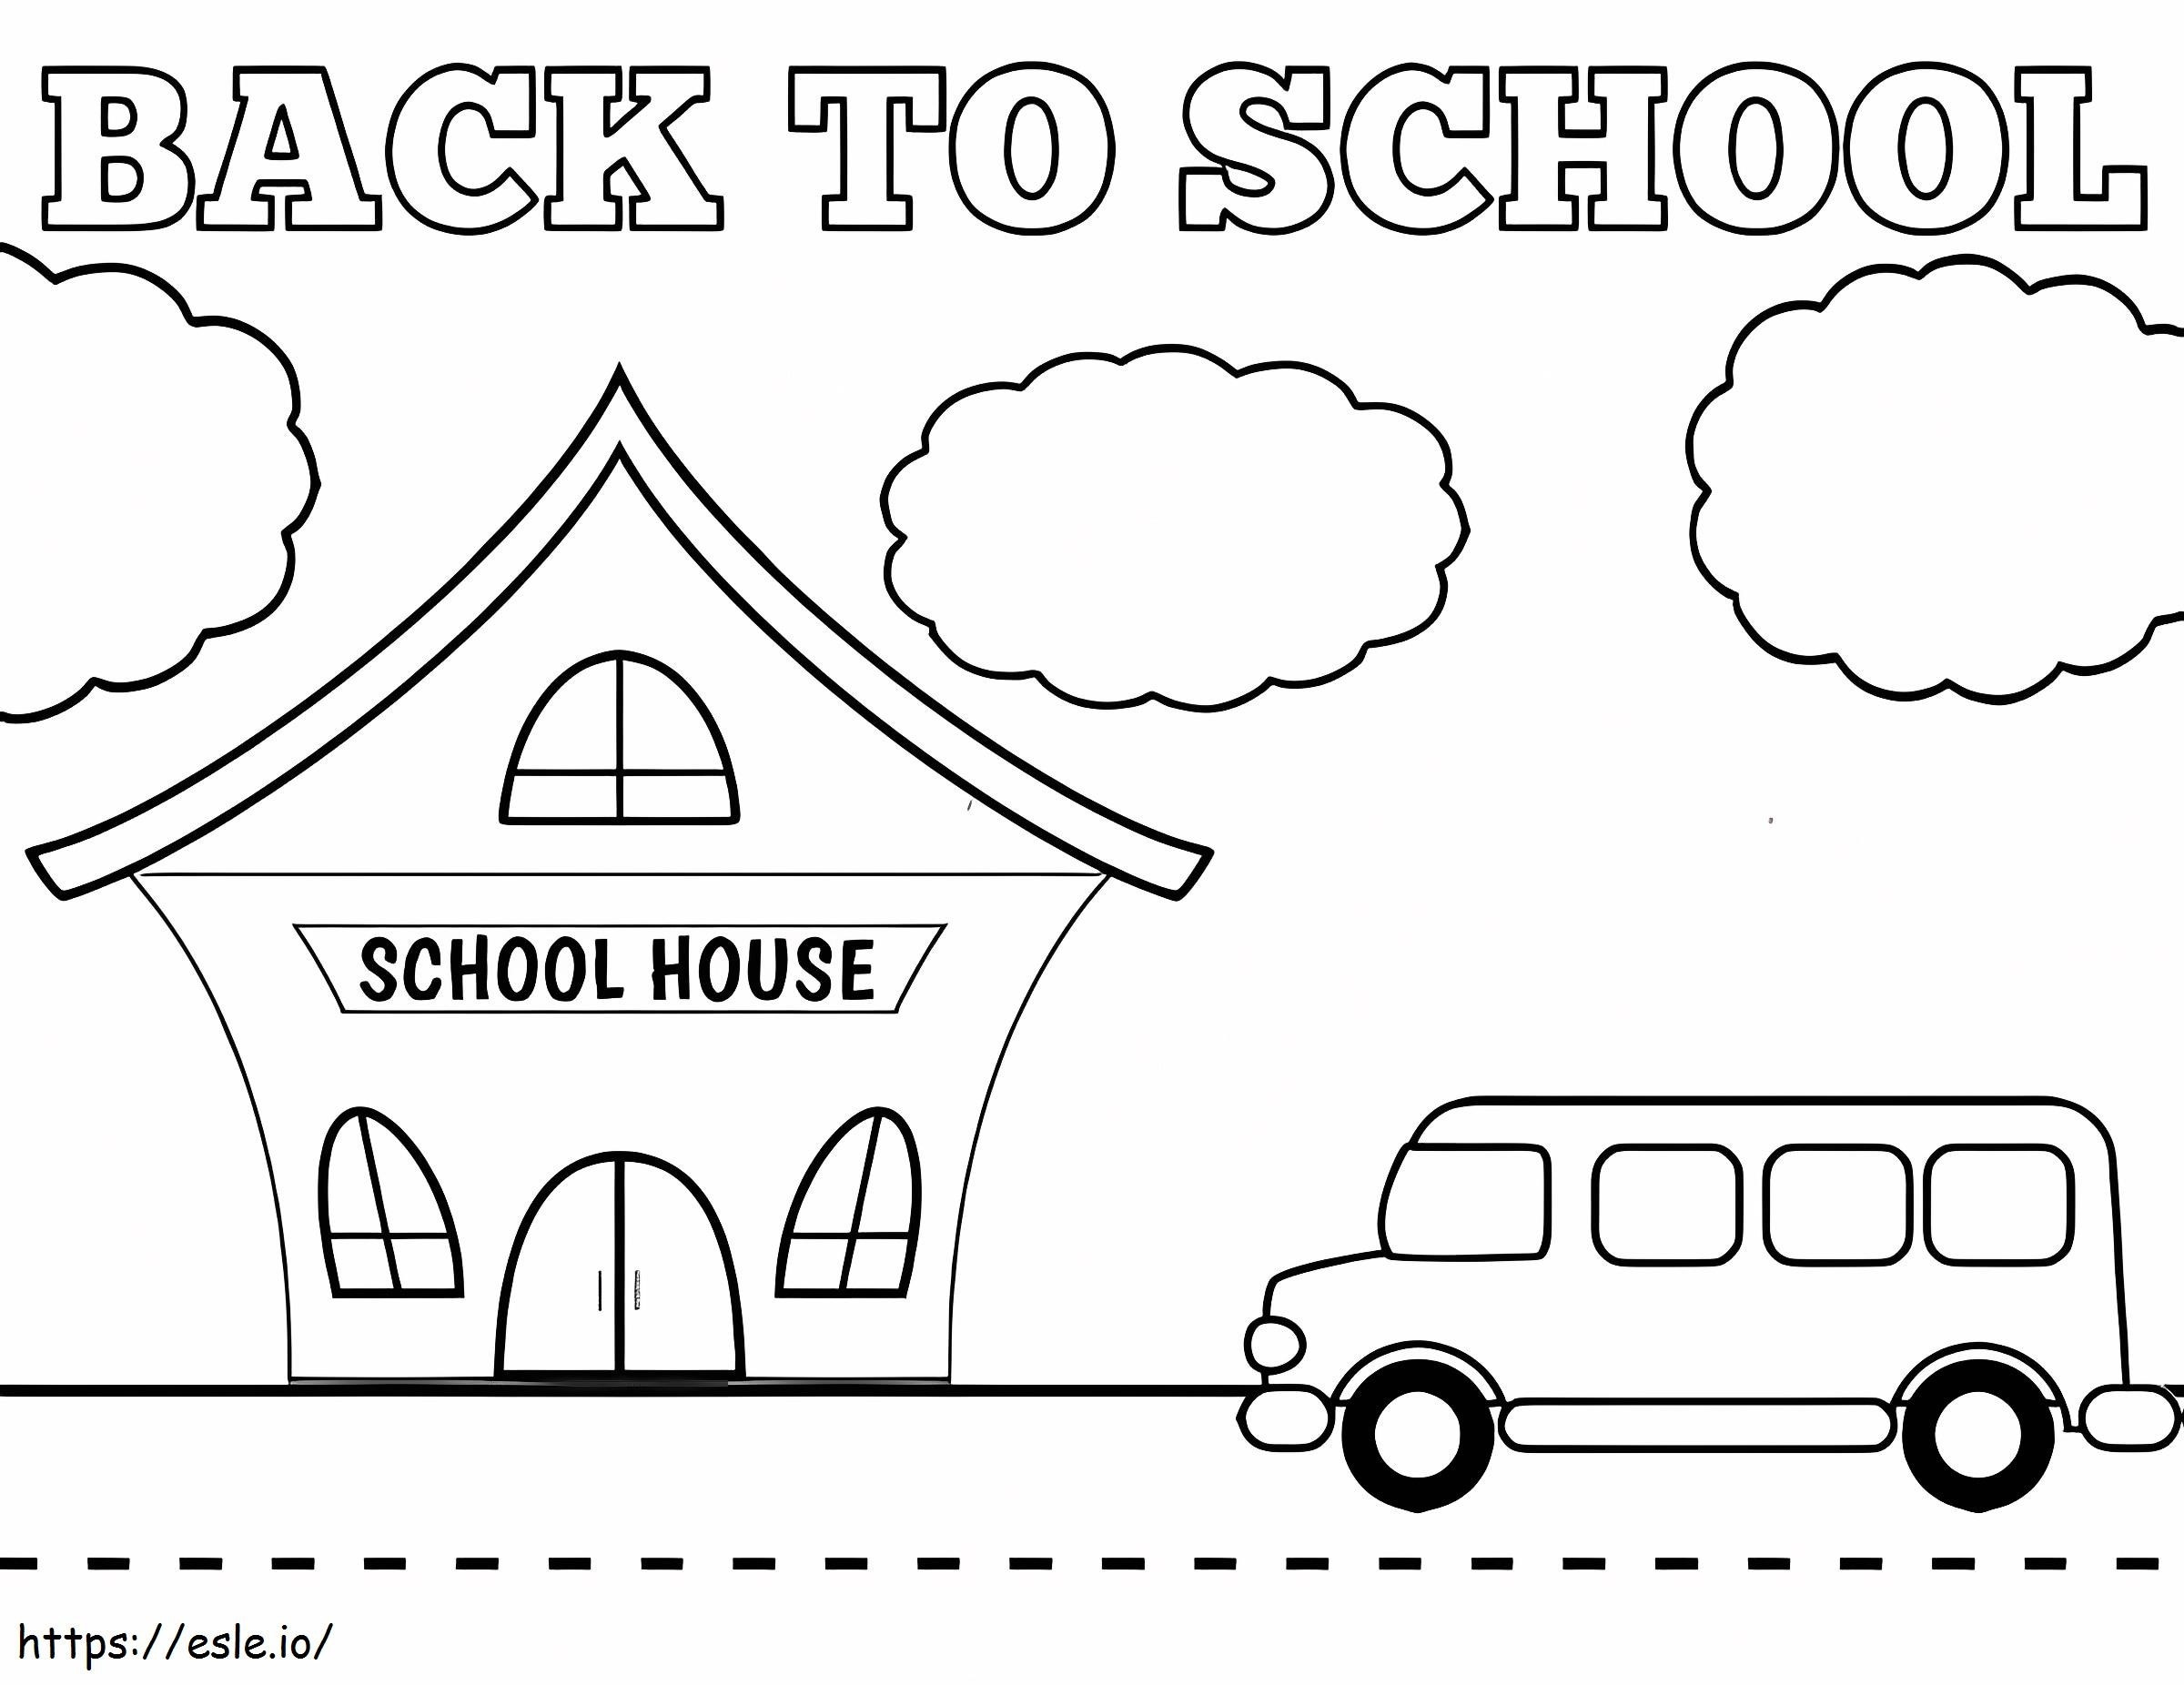 Printable Back To School coloring page